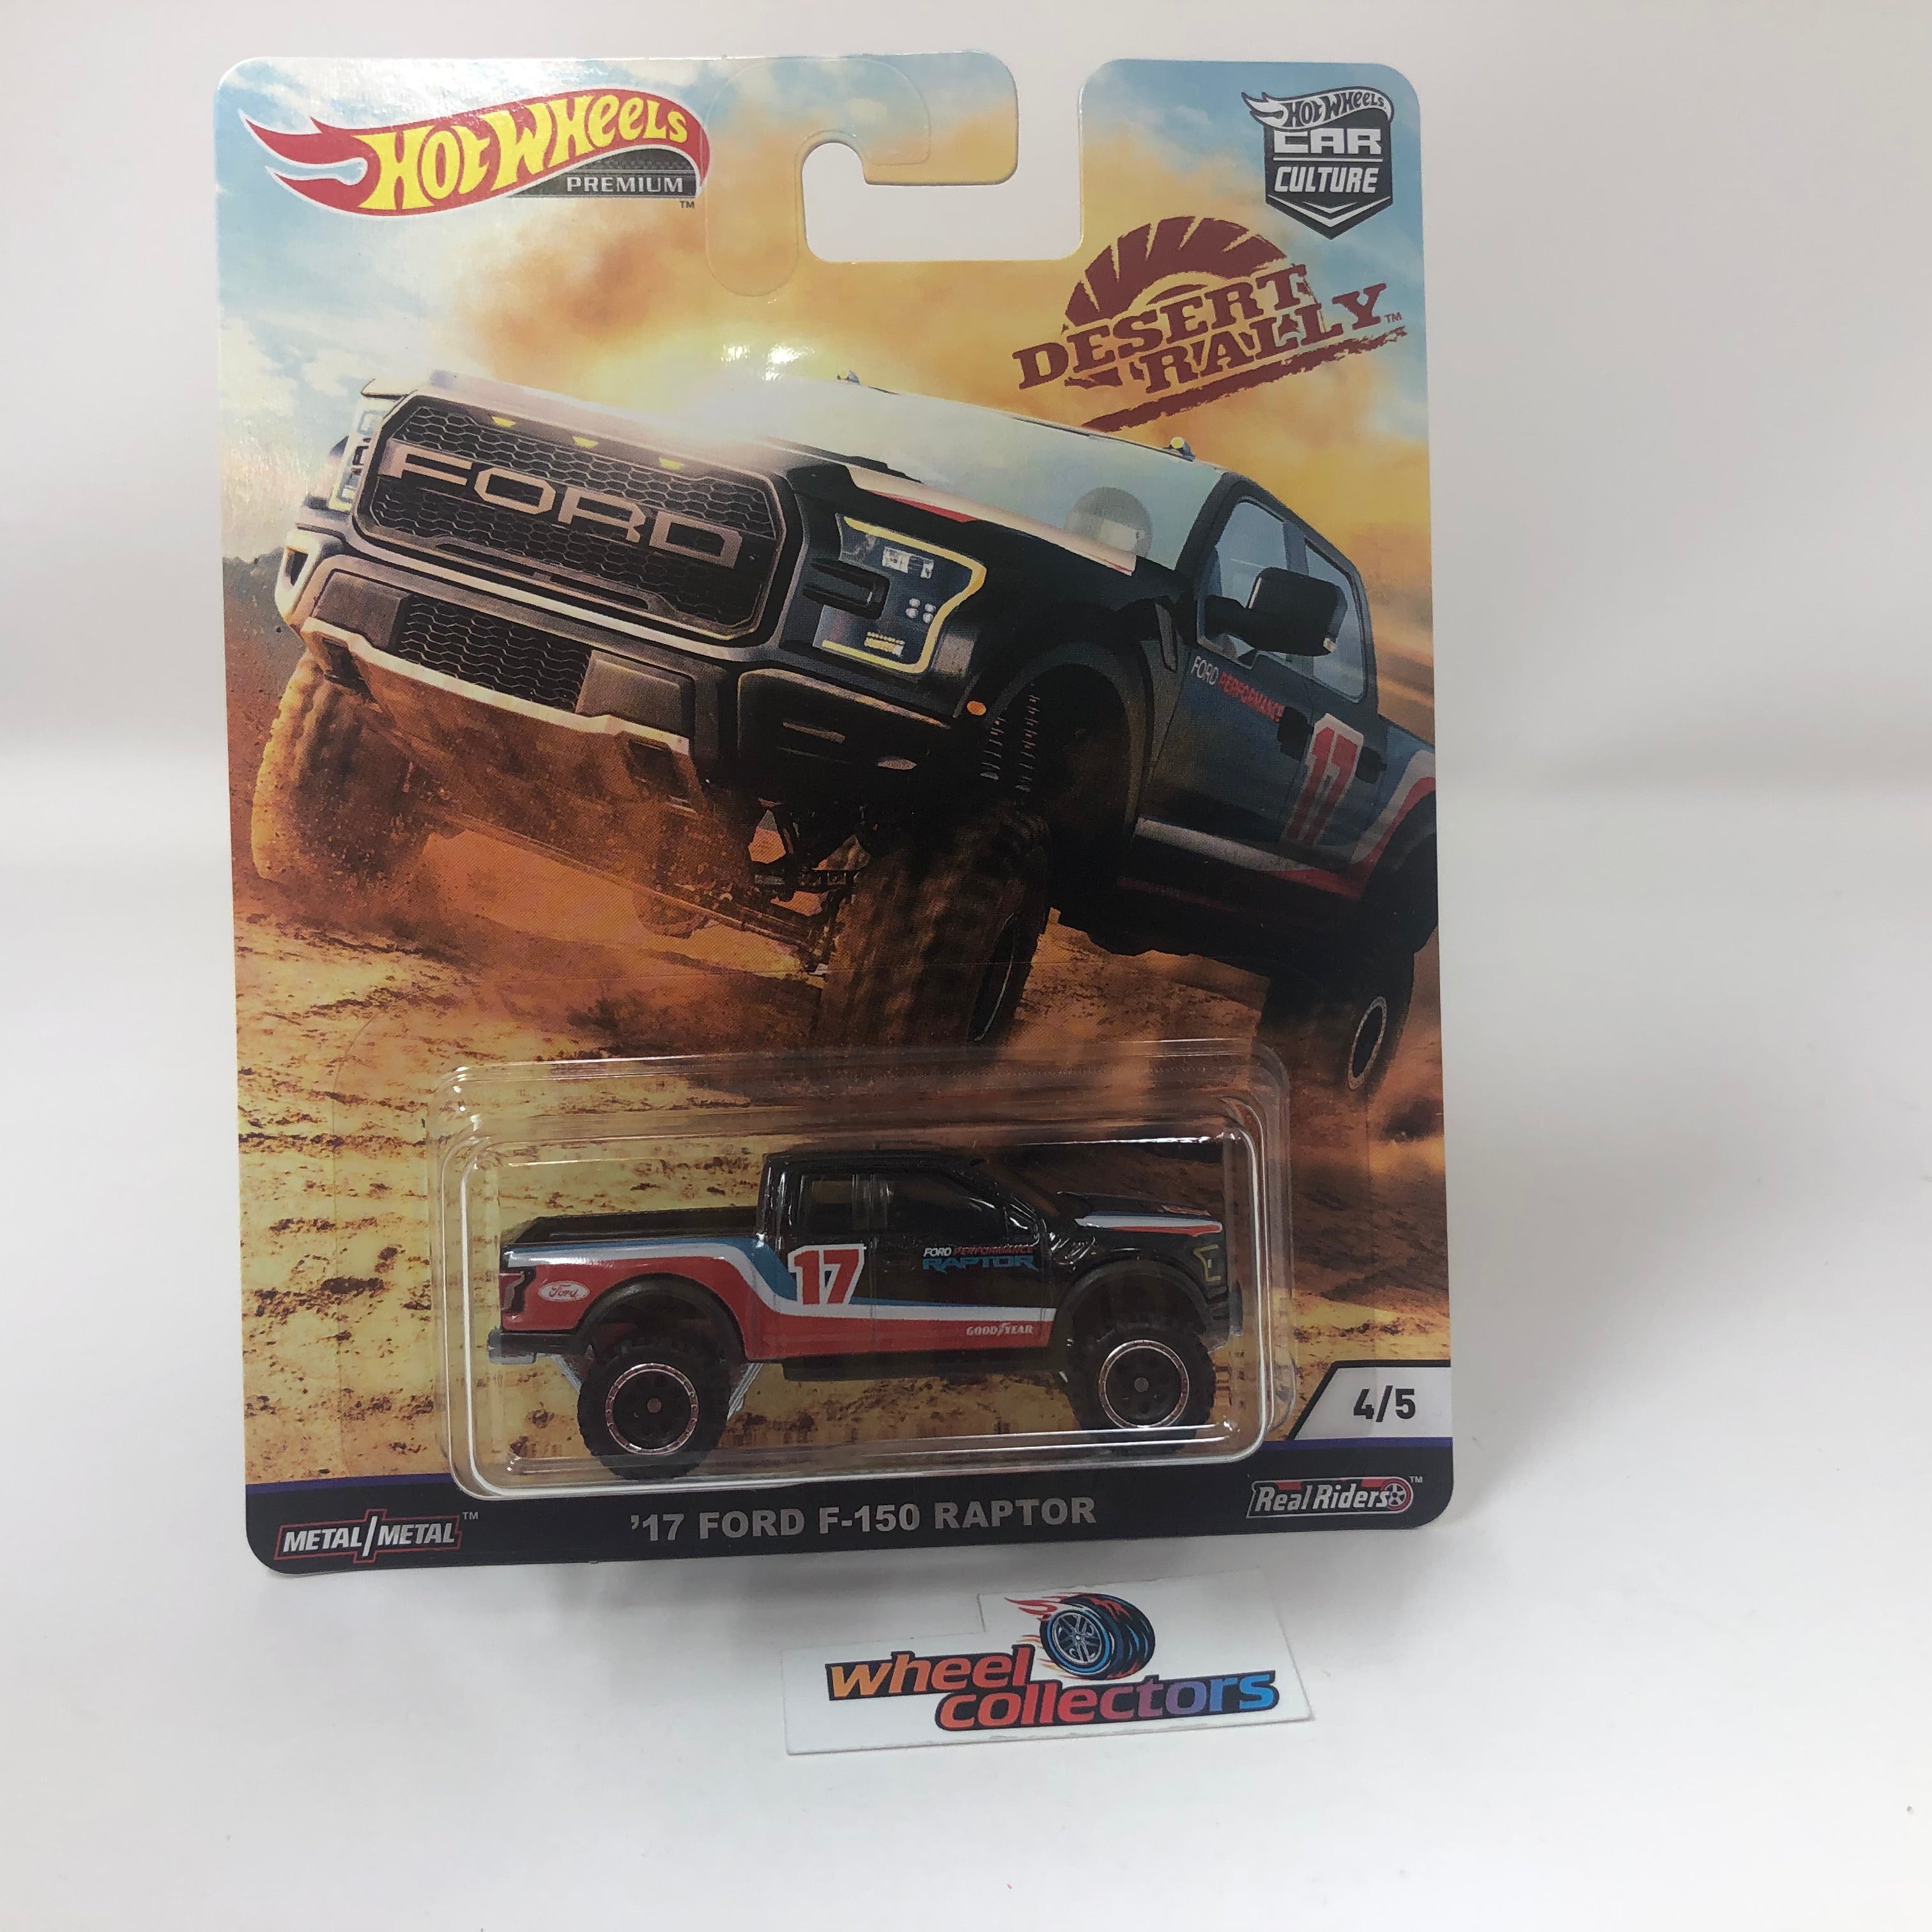 '17 Ford F-150 Raptor * Hot Wheels DESERT RALLY Car Culture –  Wheelcollectors